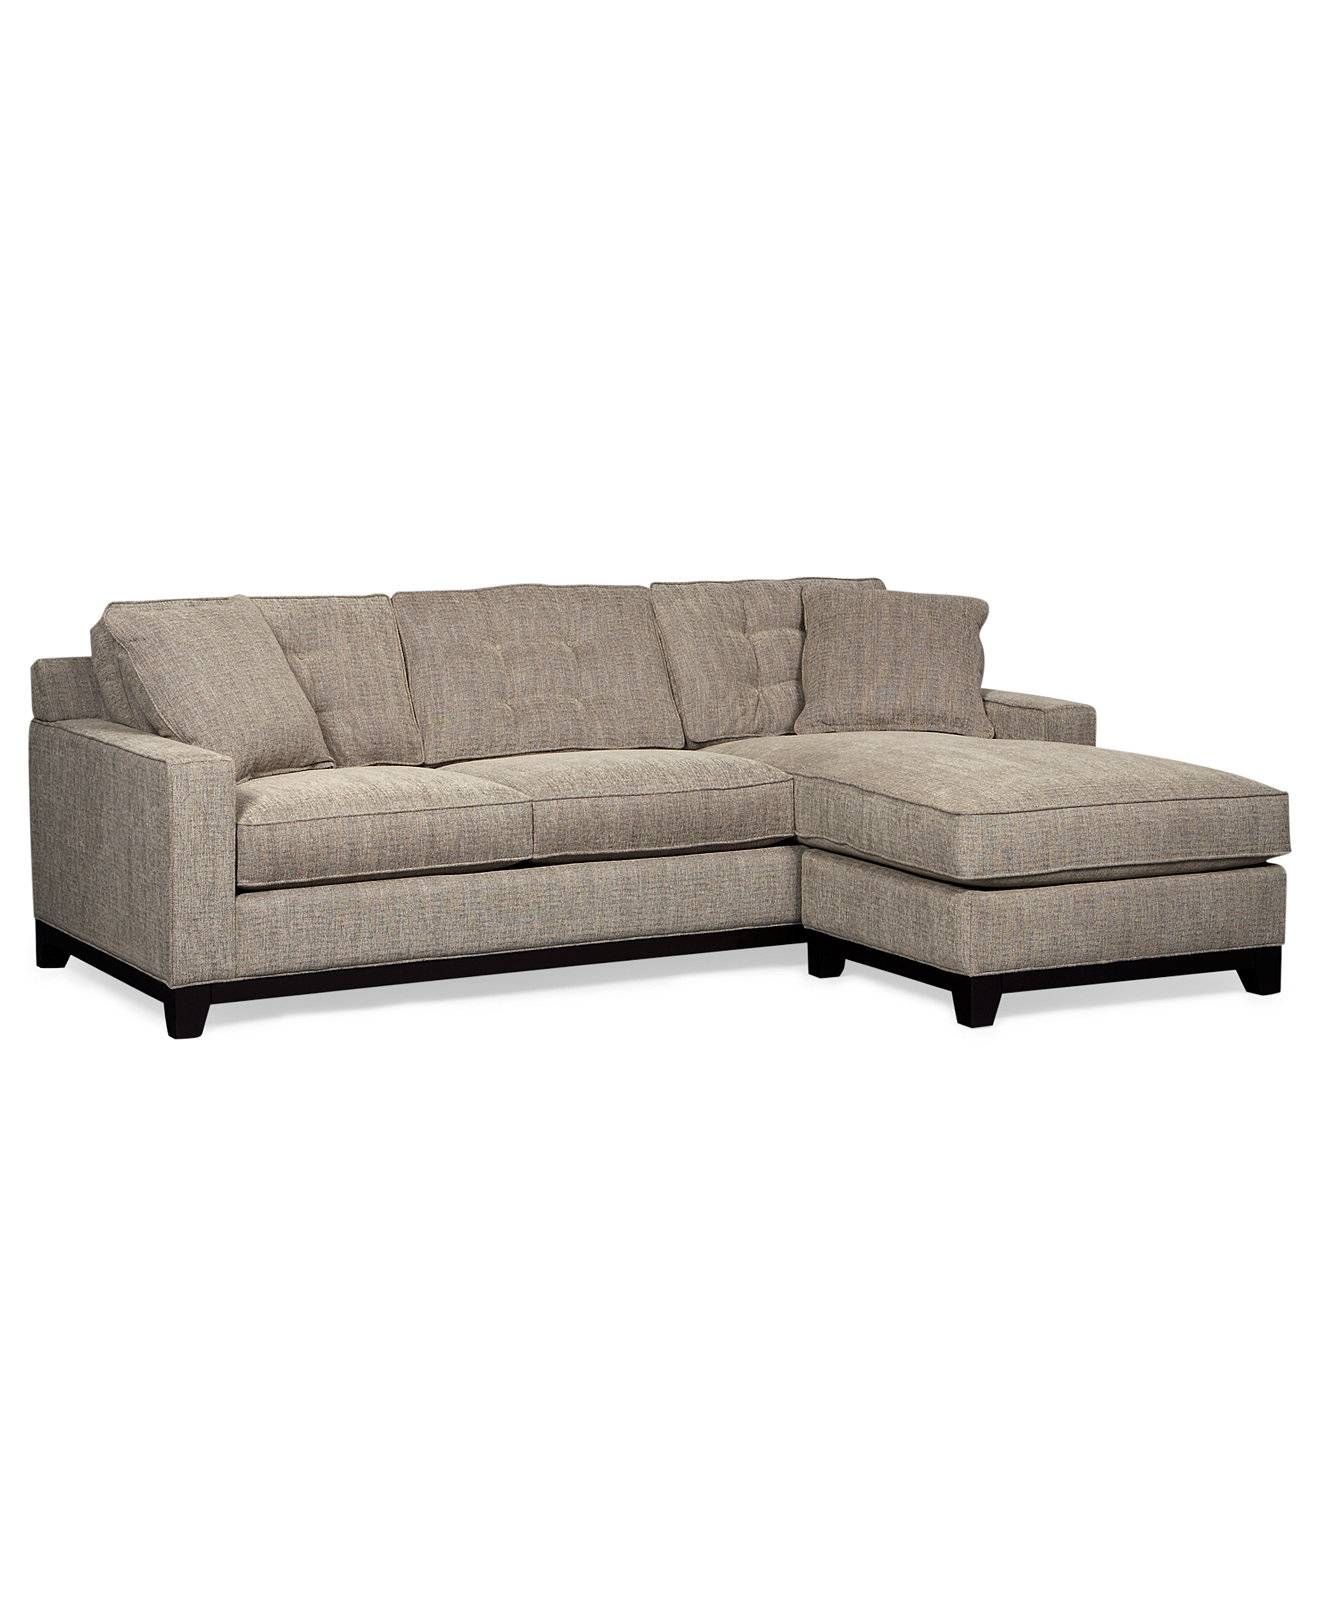 Sofas: Macys Furniture Sofa Bed | Sectional Sleeper Sofa Queen Regarding Sleeper Sectional Sofas (View 26 of 30)